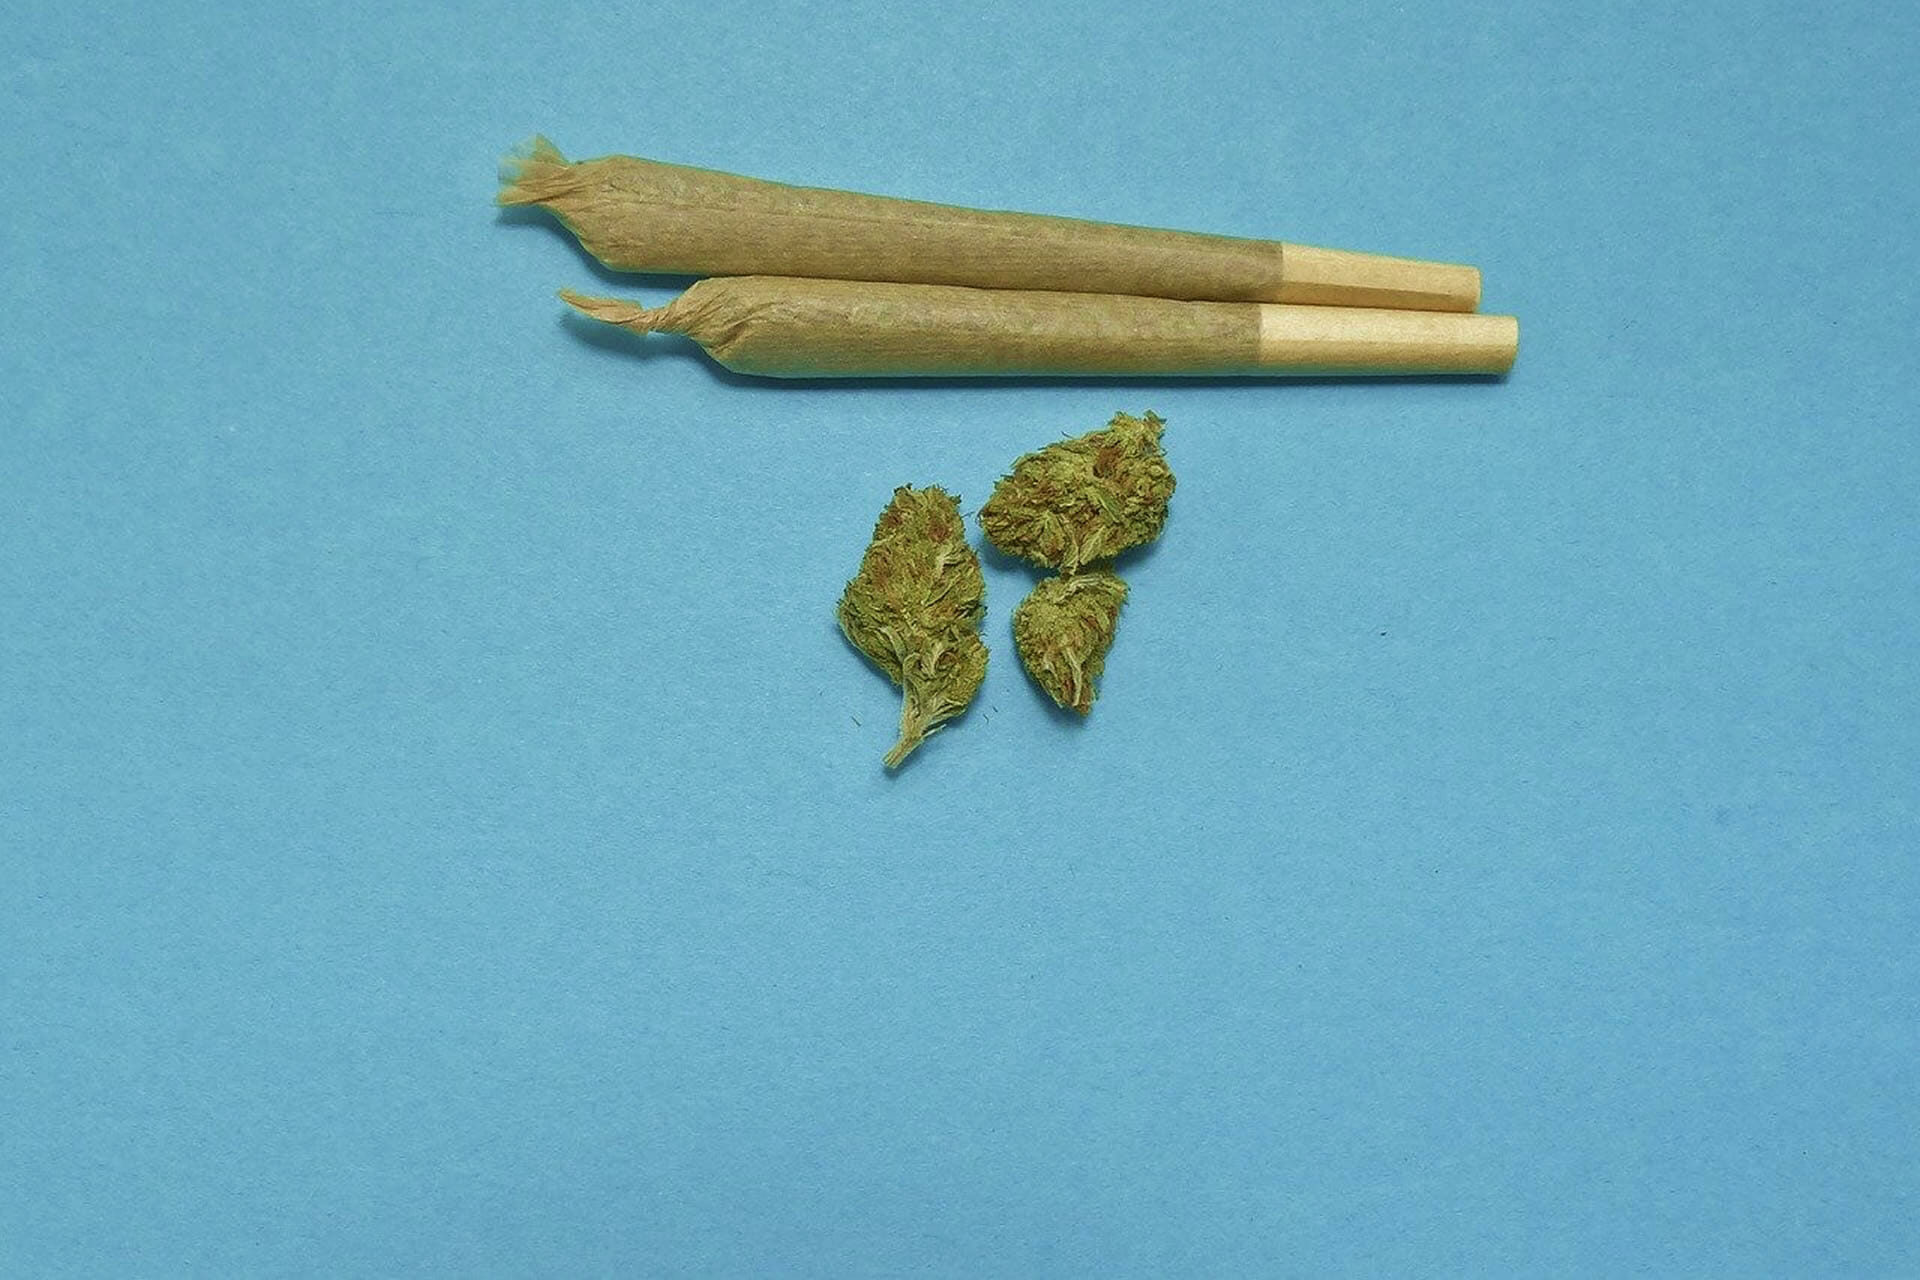 A quick and easy method to roll a good joint